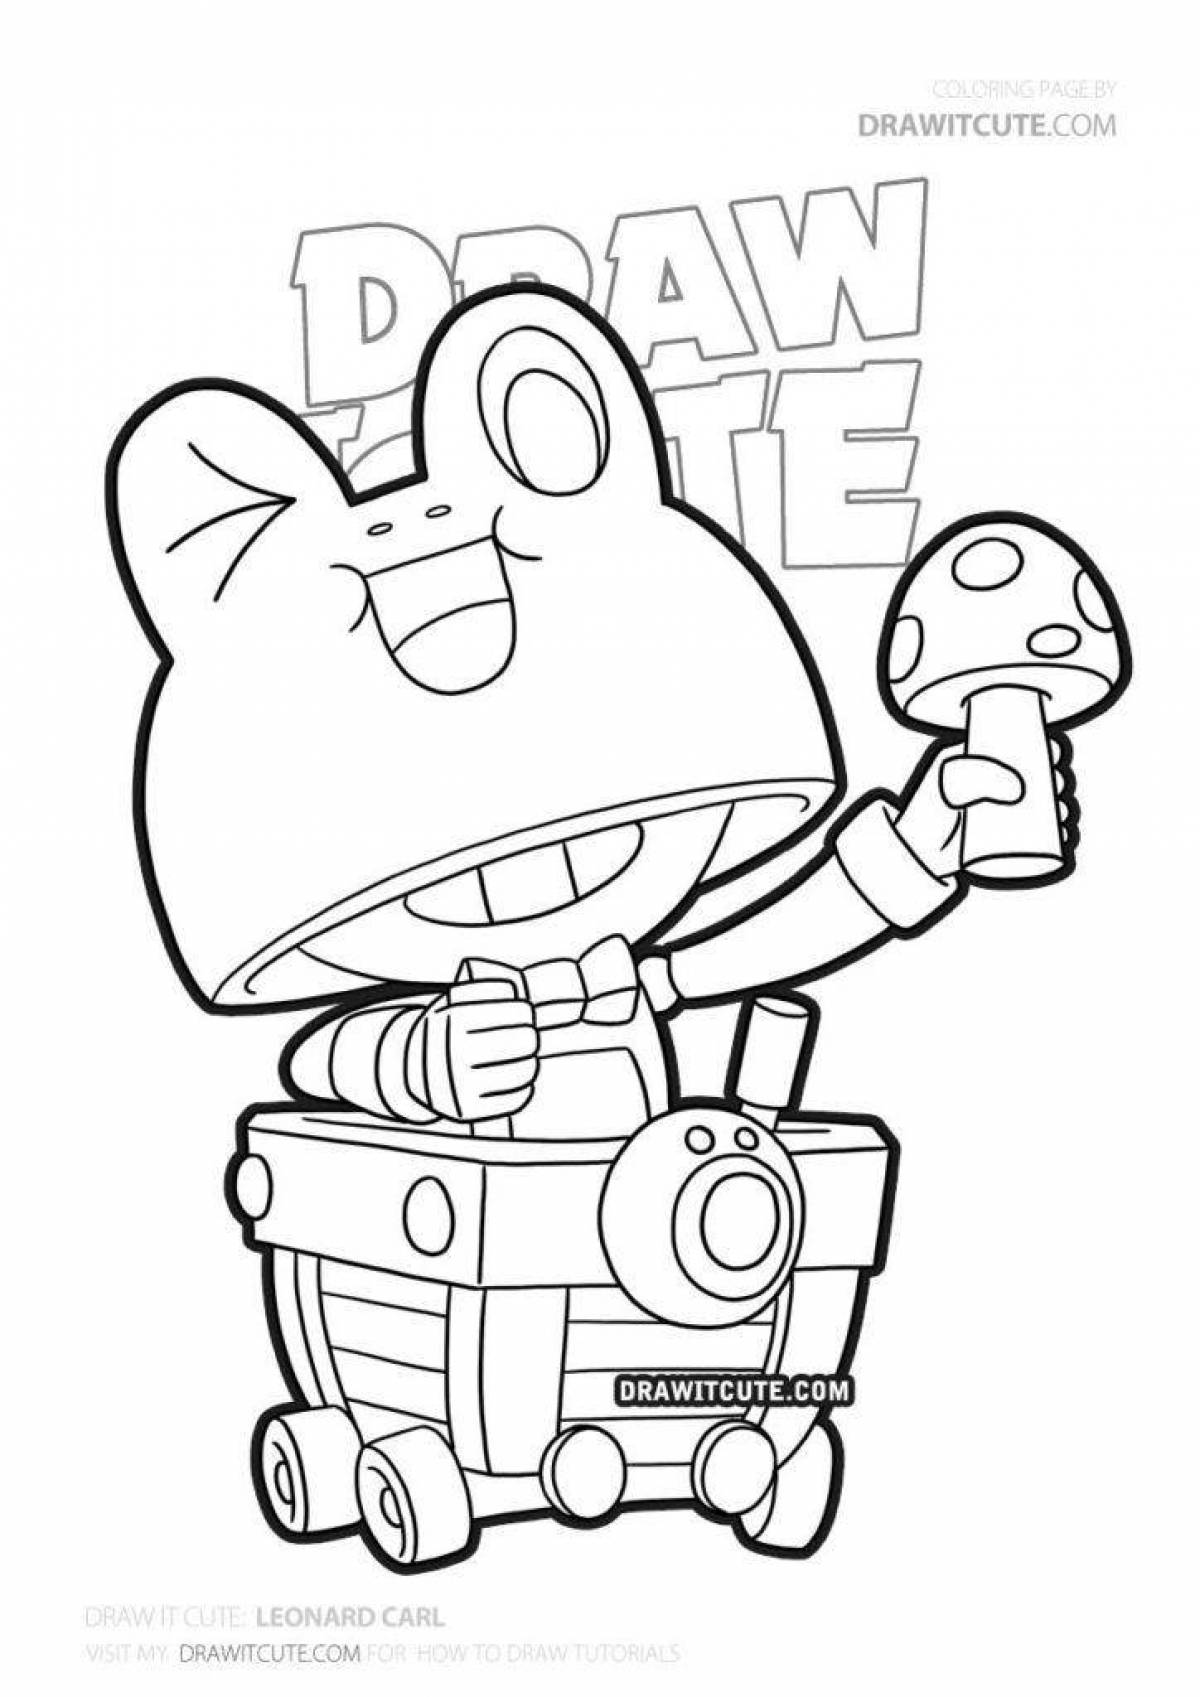 Radiant coloring page brawl stars volt